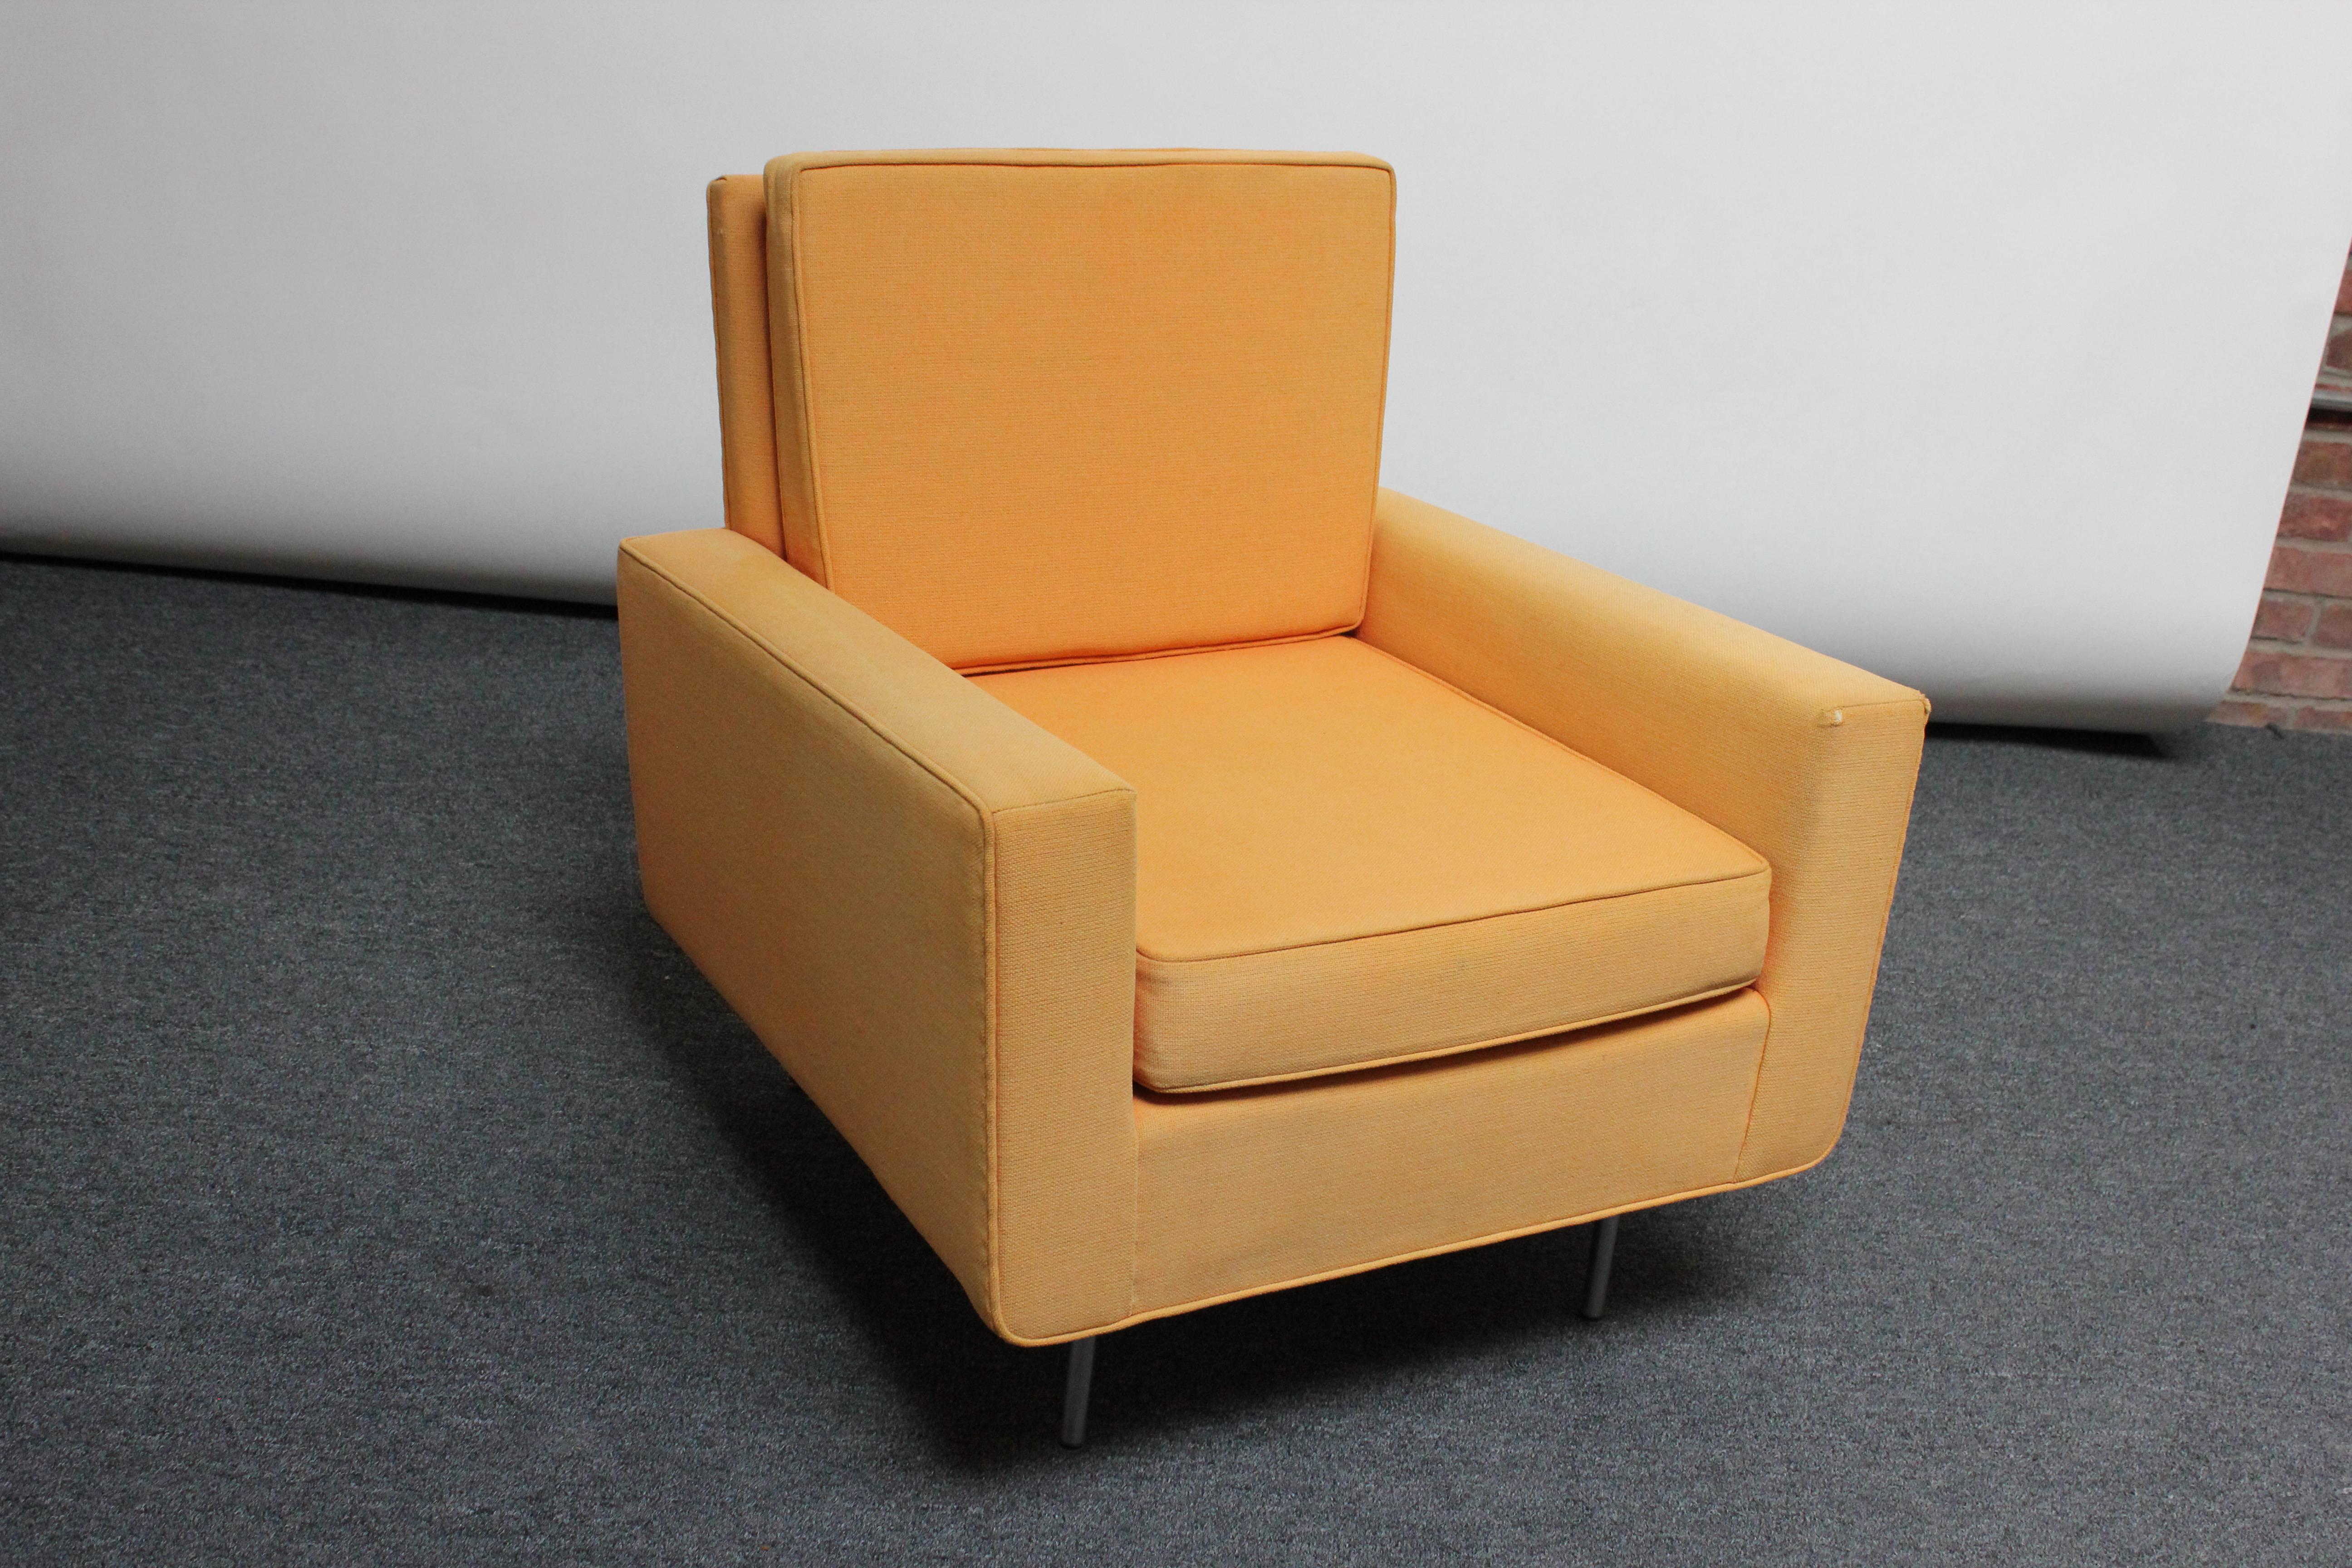 Knoll arm / lounge chair designed by Florence Knoll in the early 1950's retaining its original orange fabric supported by cylindrical polished steel feet. This 1960s example, as evidenced by the 'Knoll Associates Inc. 320 Park Avenue New York, NY'